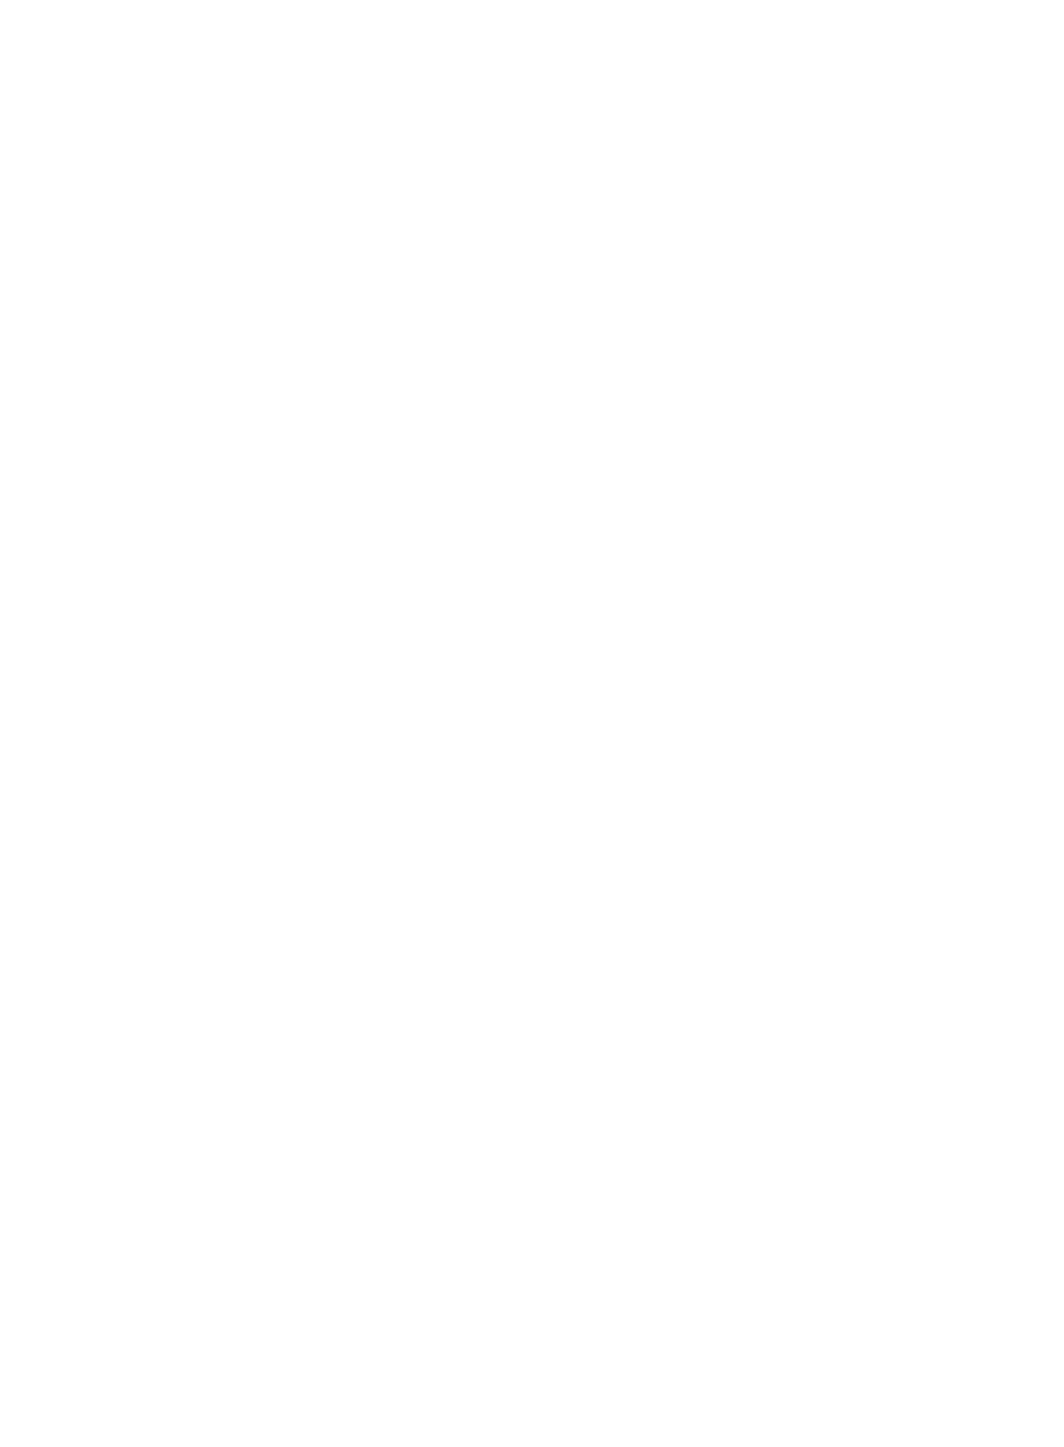 University of Lethbridge - Continuing and Professional Education